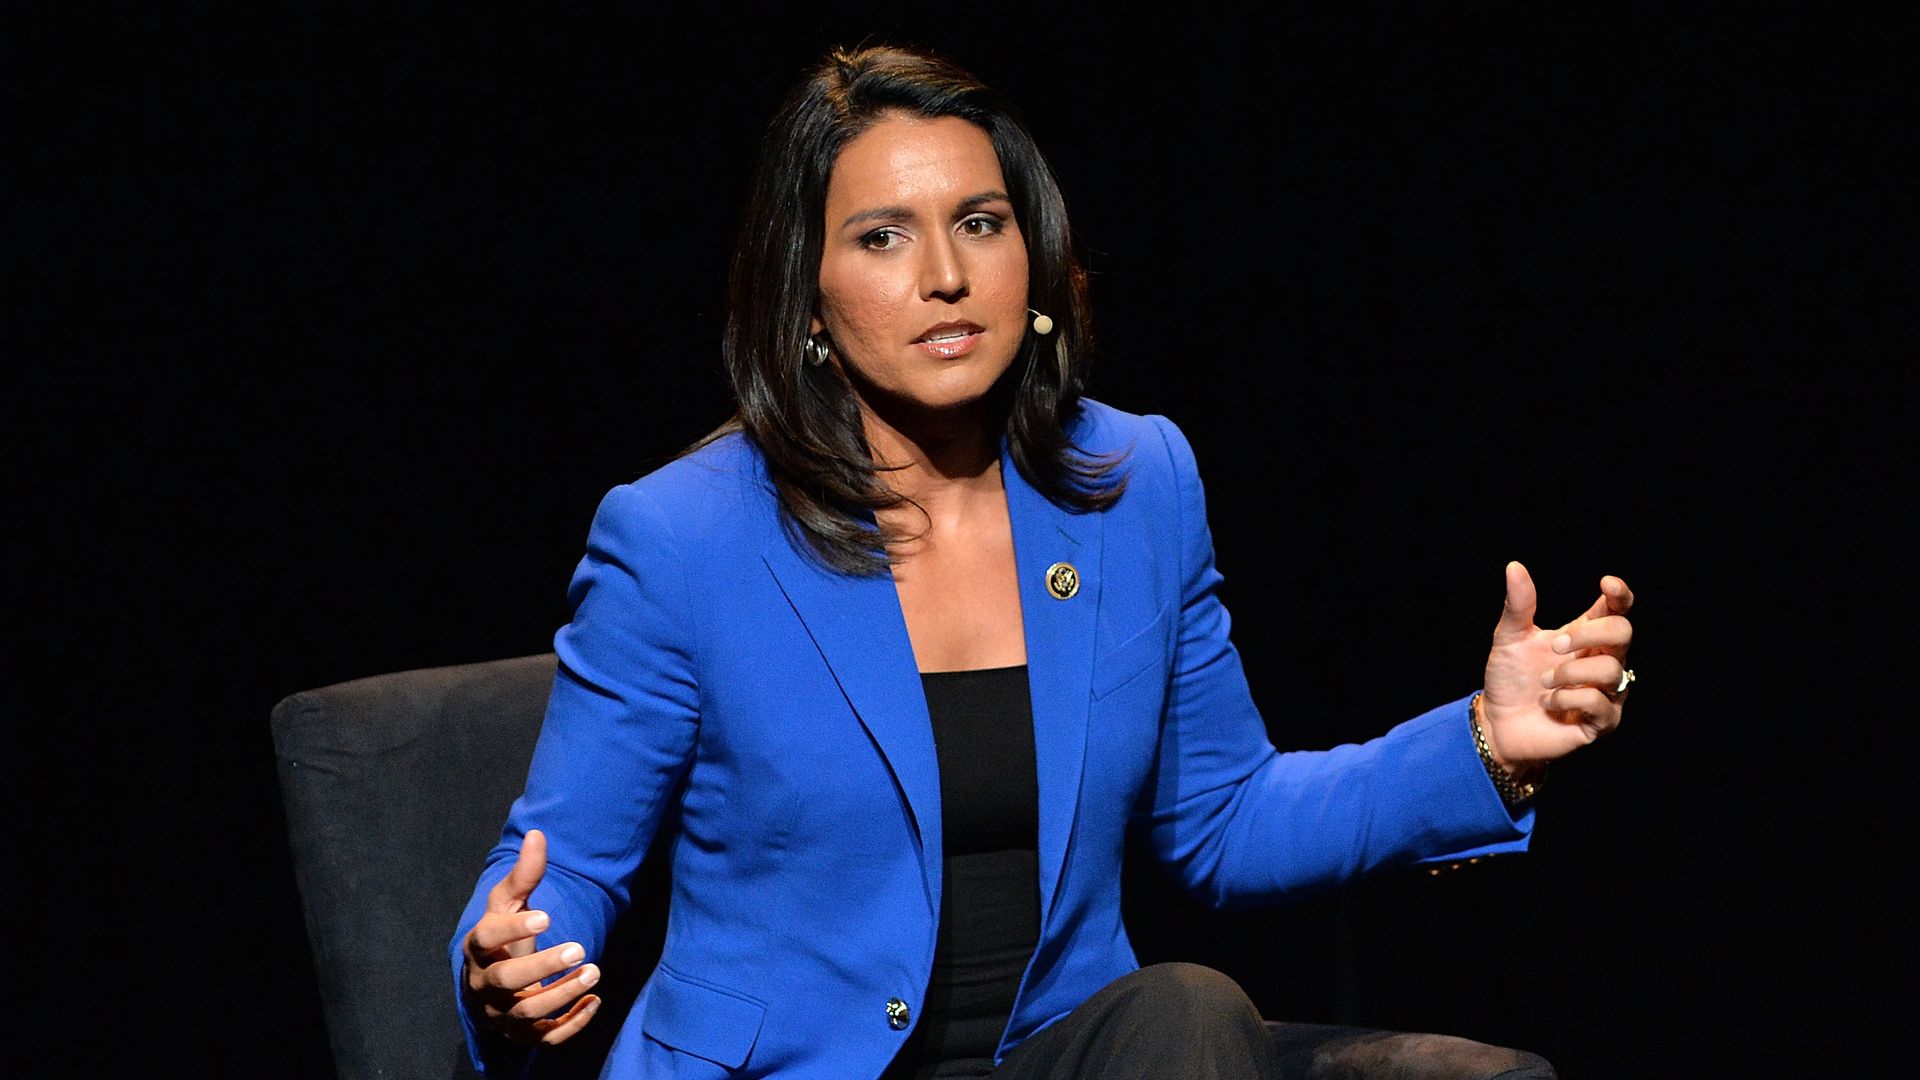 Tulsi Gabbard says evidence is needed before she can comment on whether Syria's president is a war criminal.